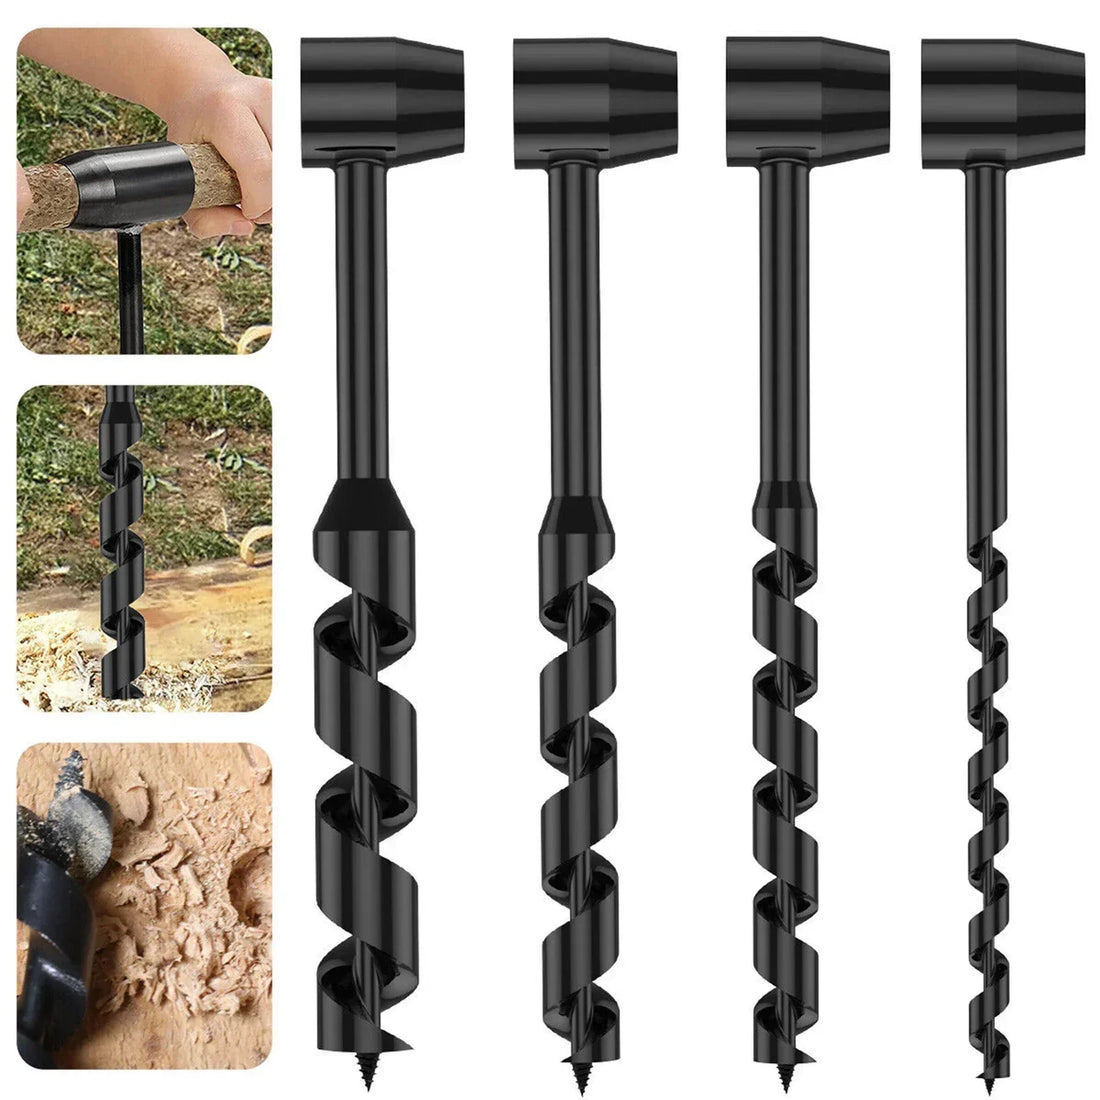  Portable Outdoor Hand Wood Punch Manual Auger Drill Bush-Craft Carbon Steel Portable Survival Bit Tools #